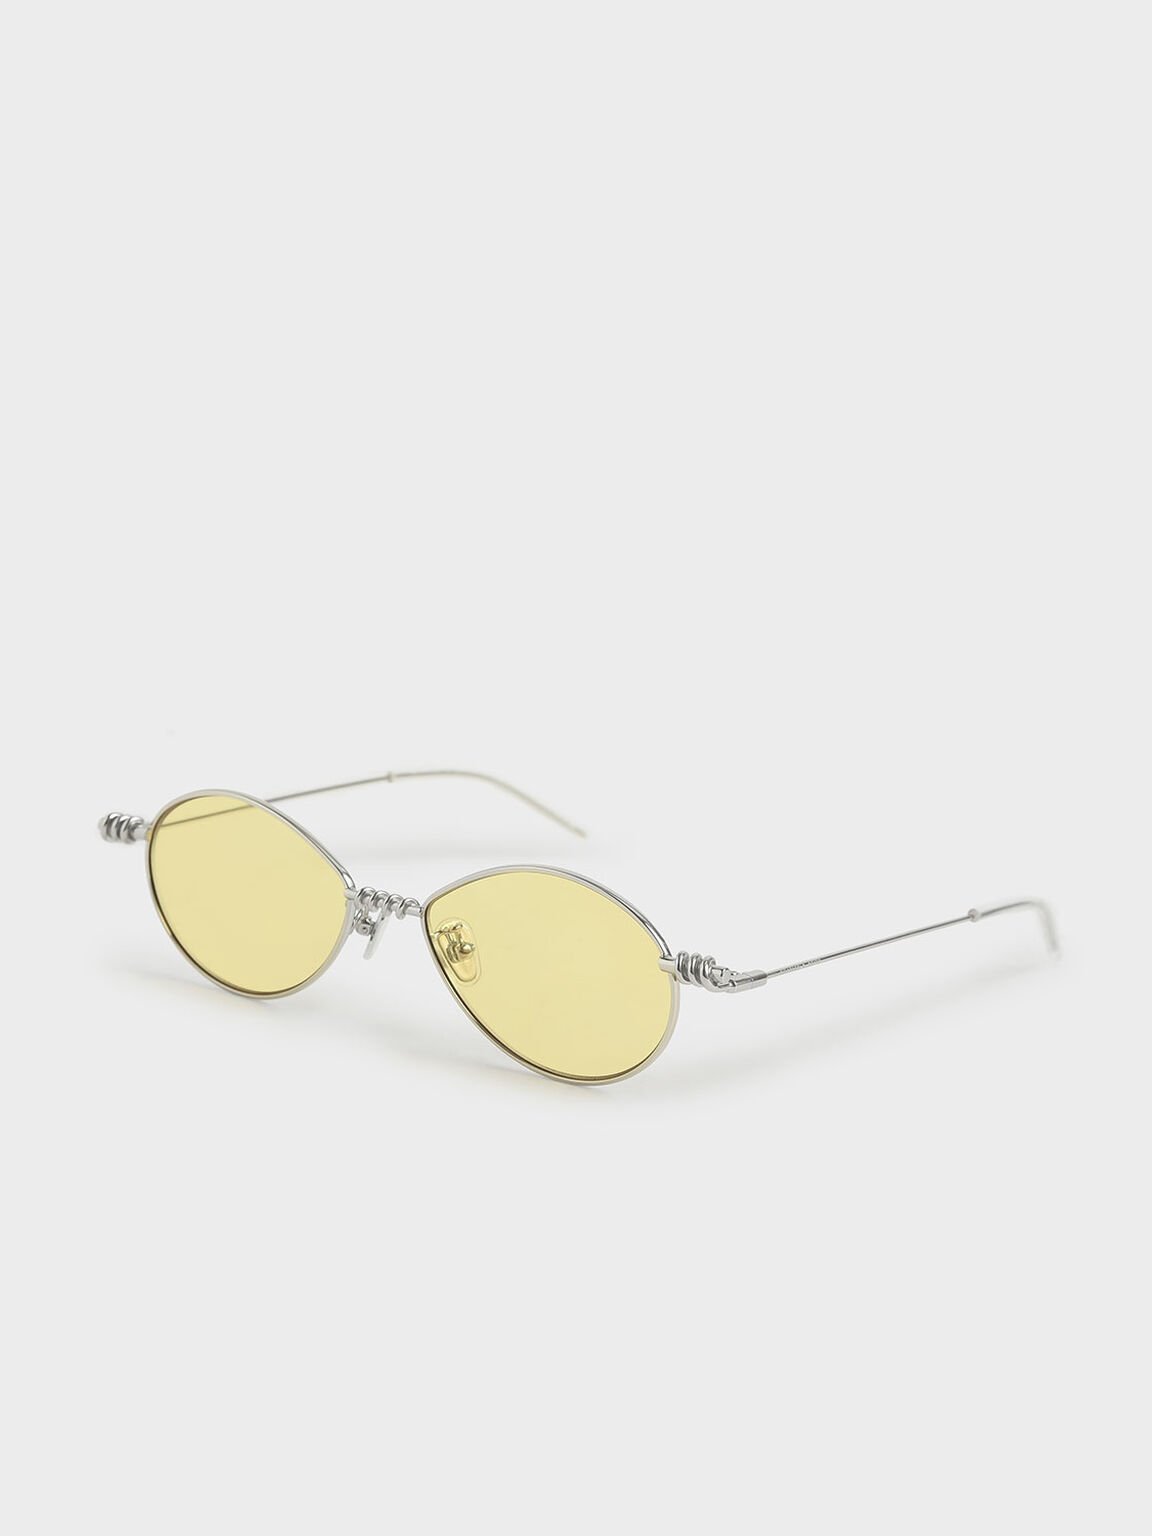 Twine Detail Oval Sunglasses, Yellow, hi-res